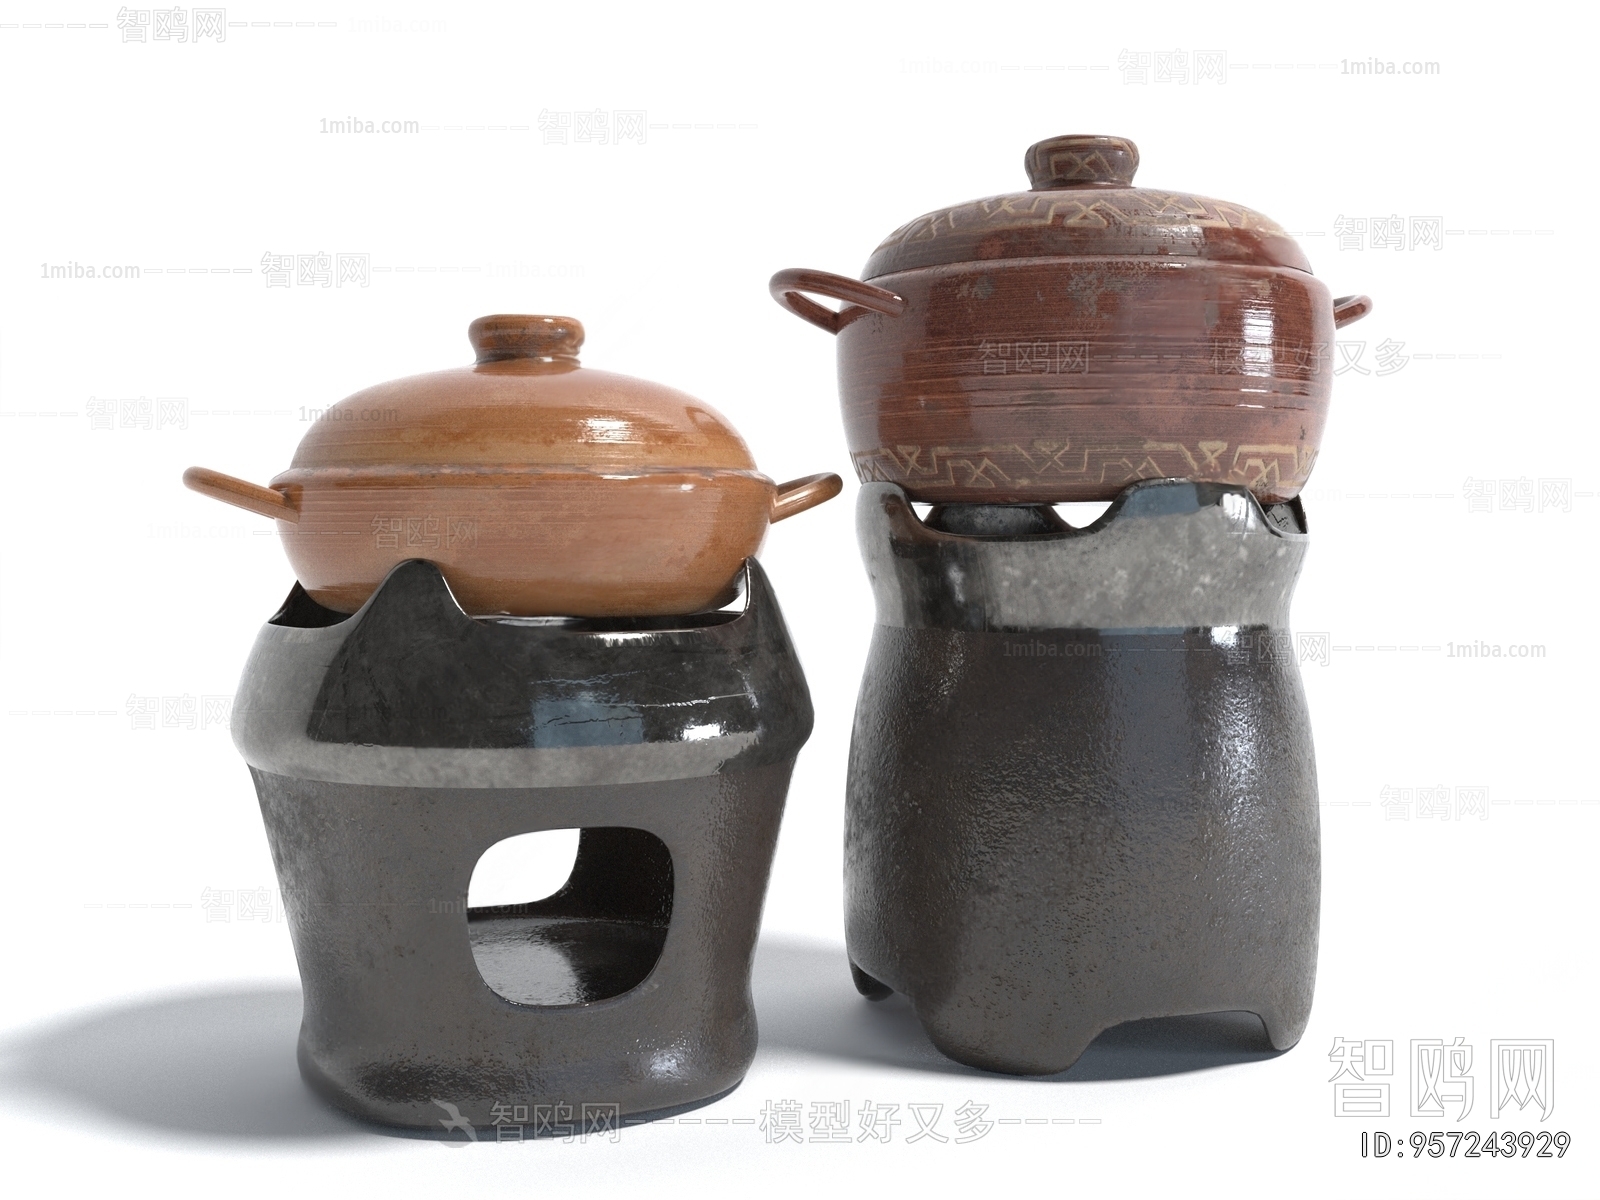 New Chinese Style Cookware